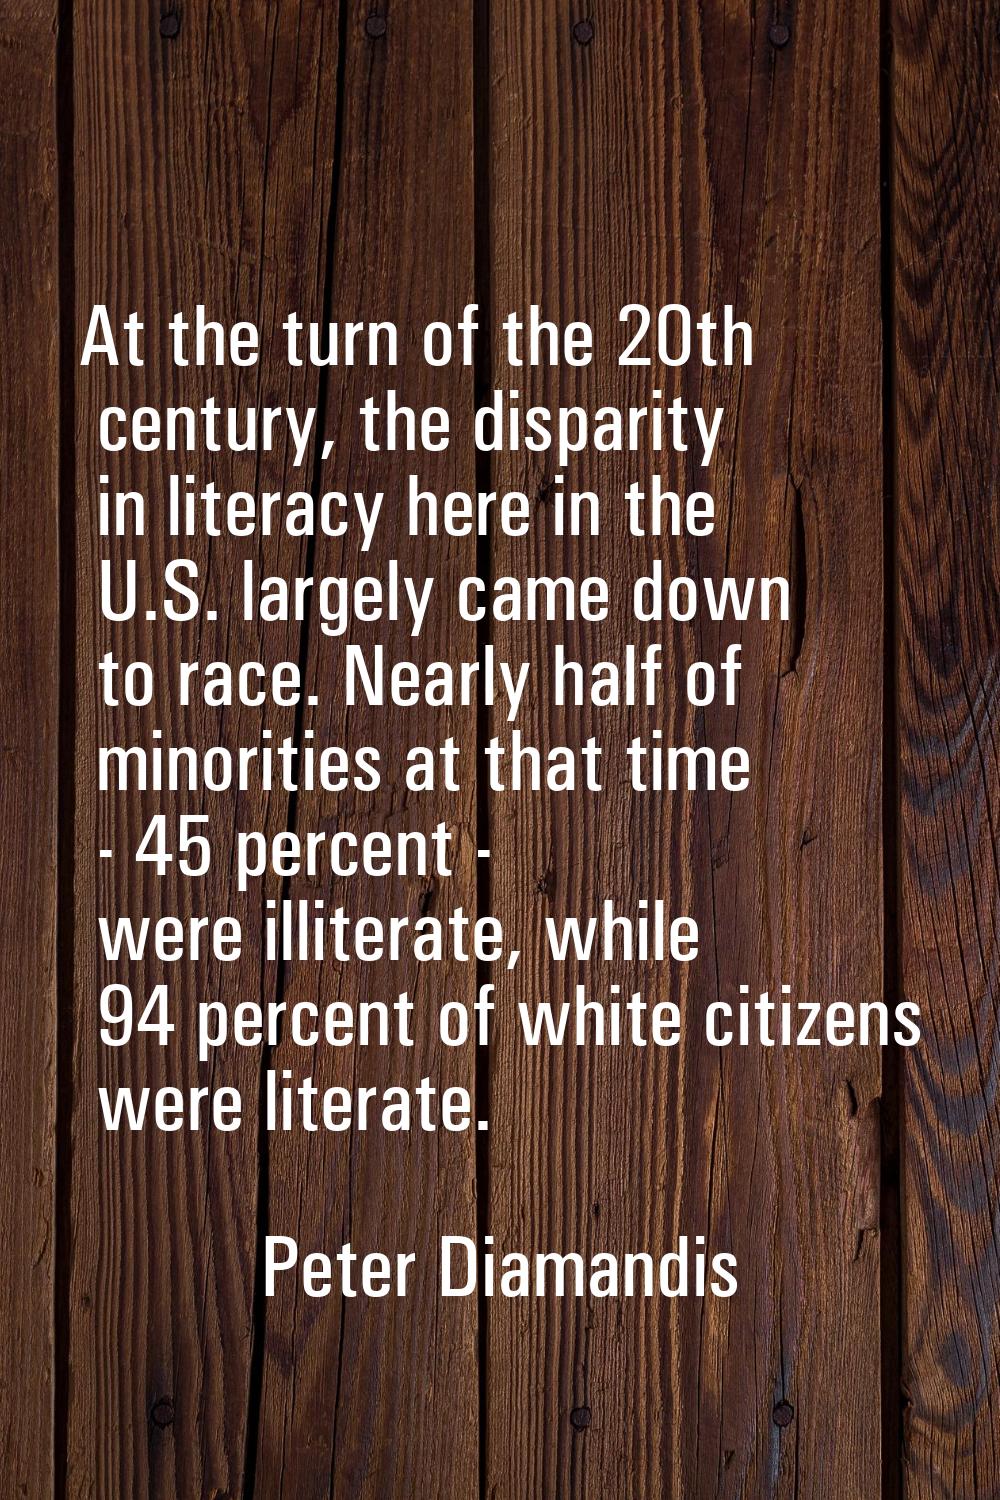 At the turn of the 20th century, the disparity in literacy here in the U.S. largely came down to ra